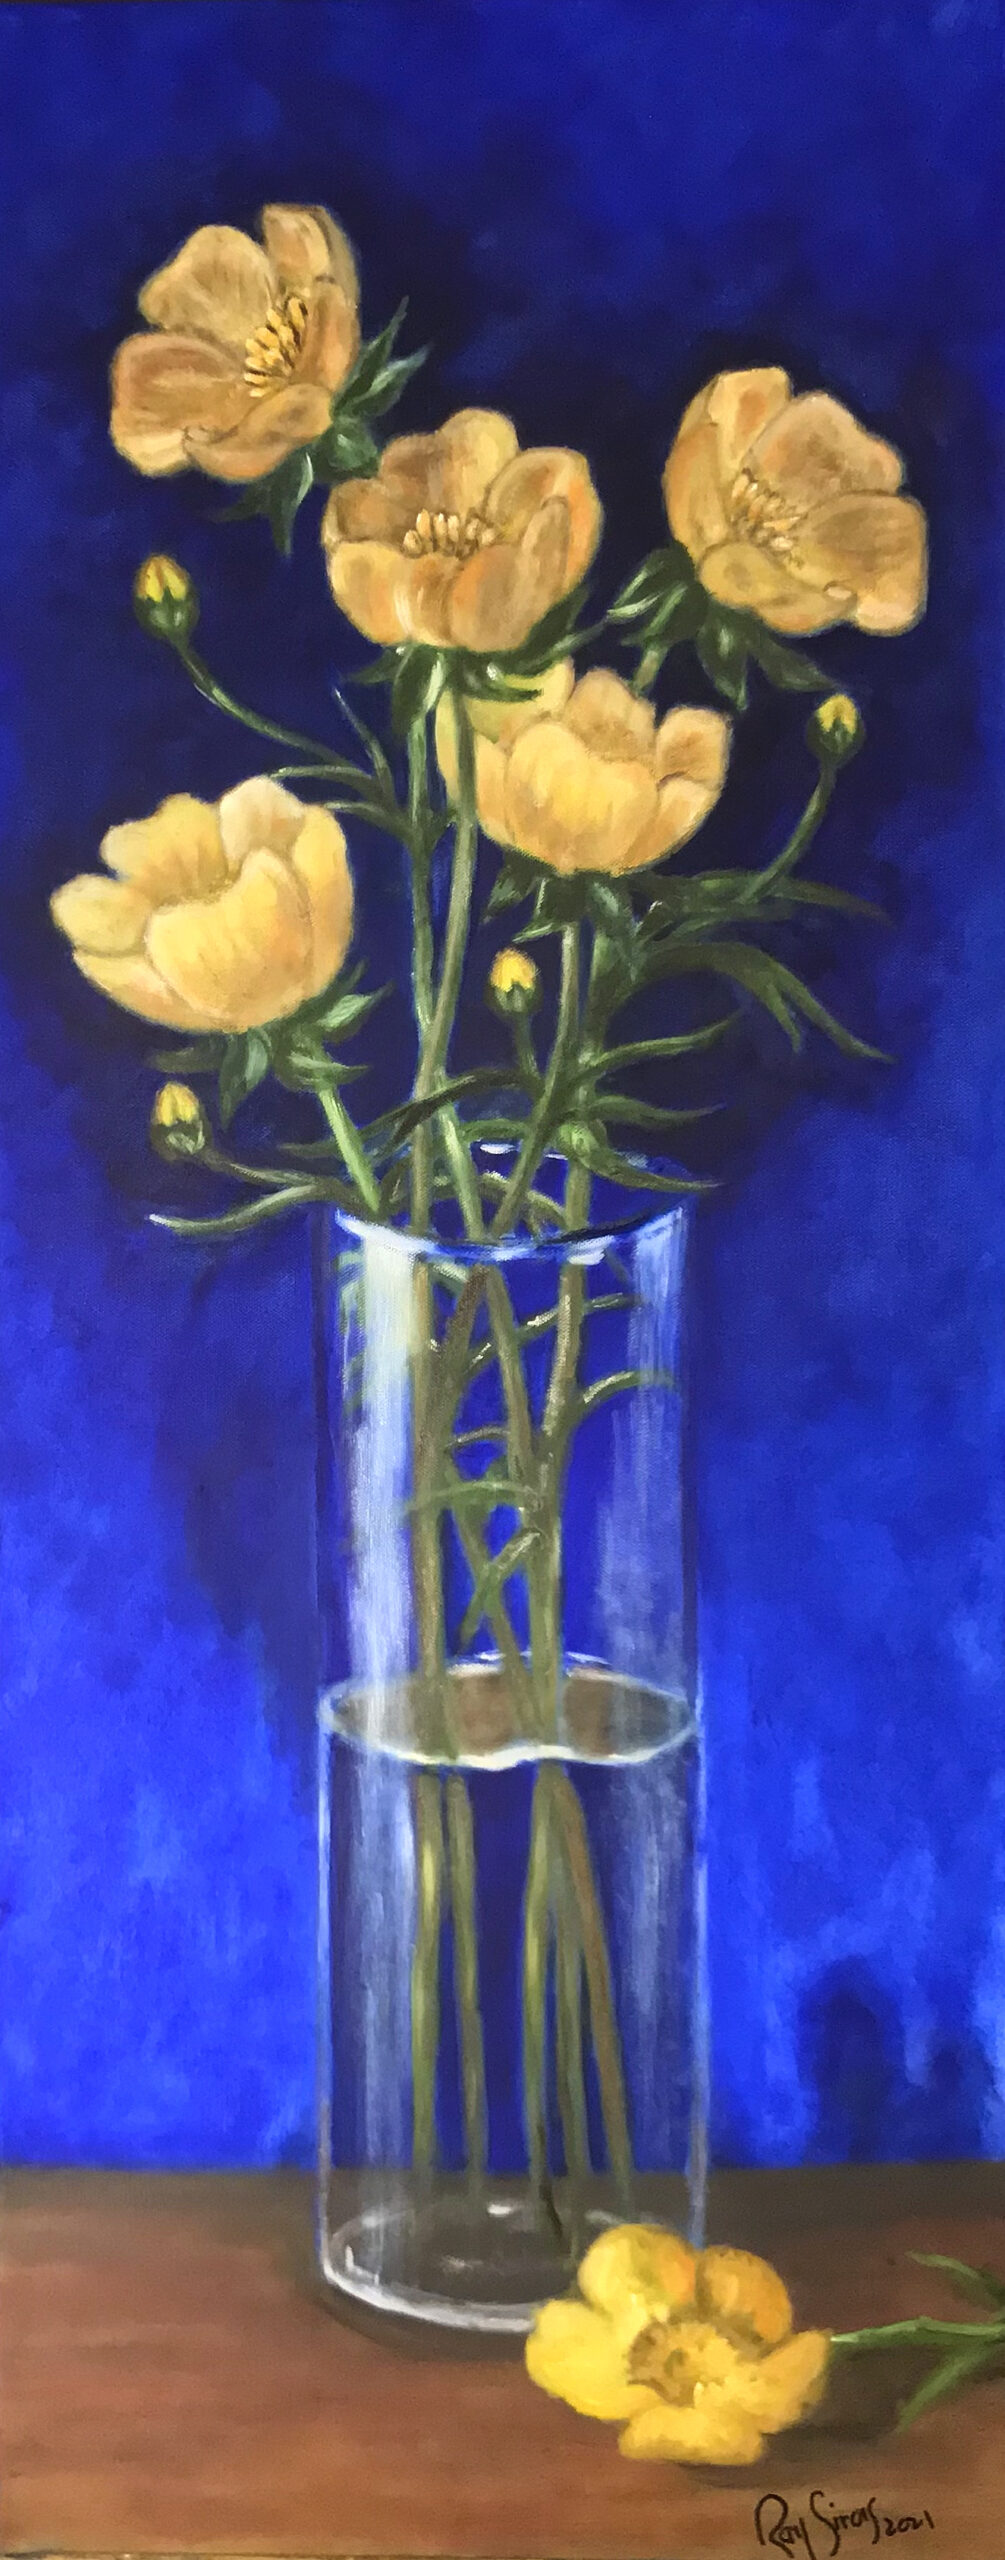 Buttercup flowers in glass vase